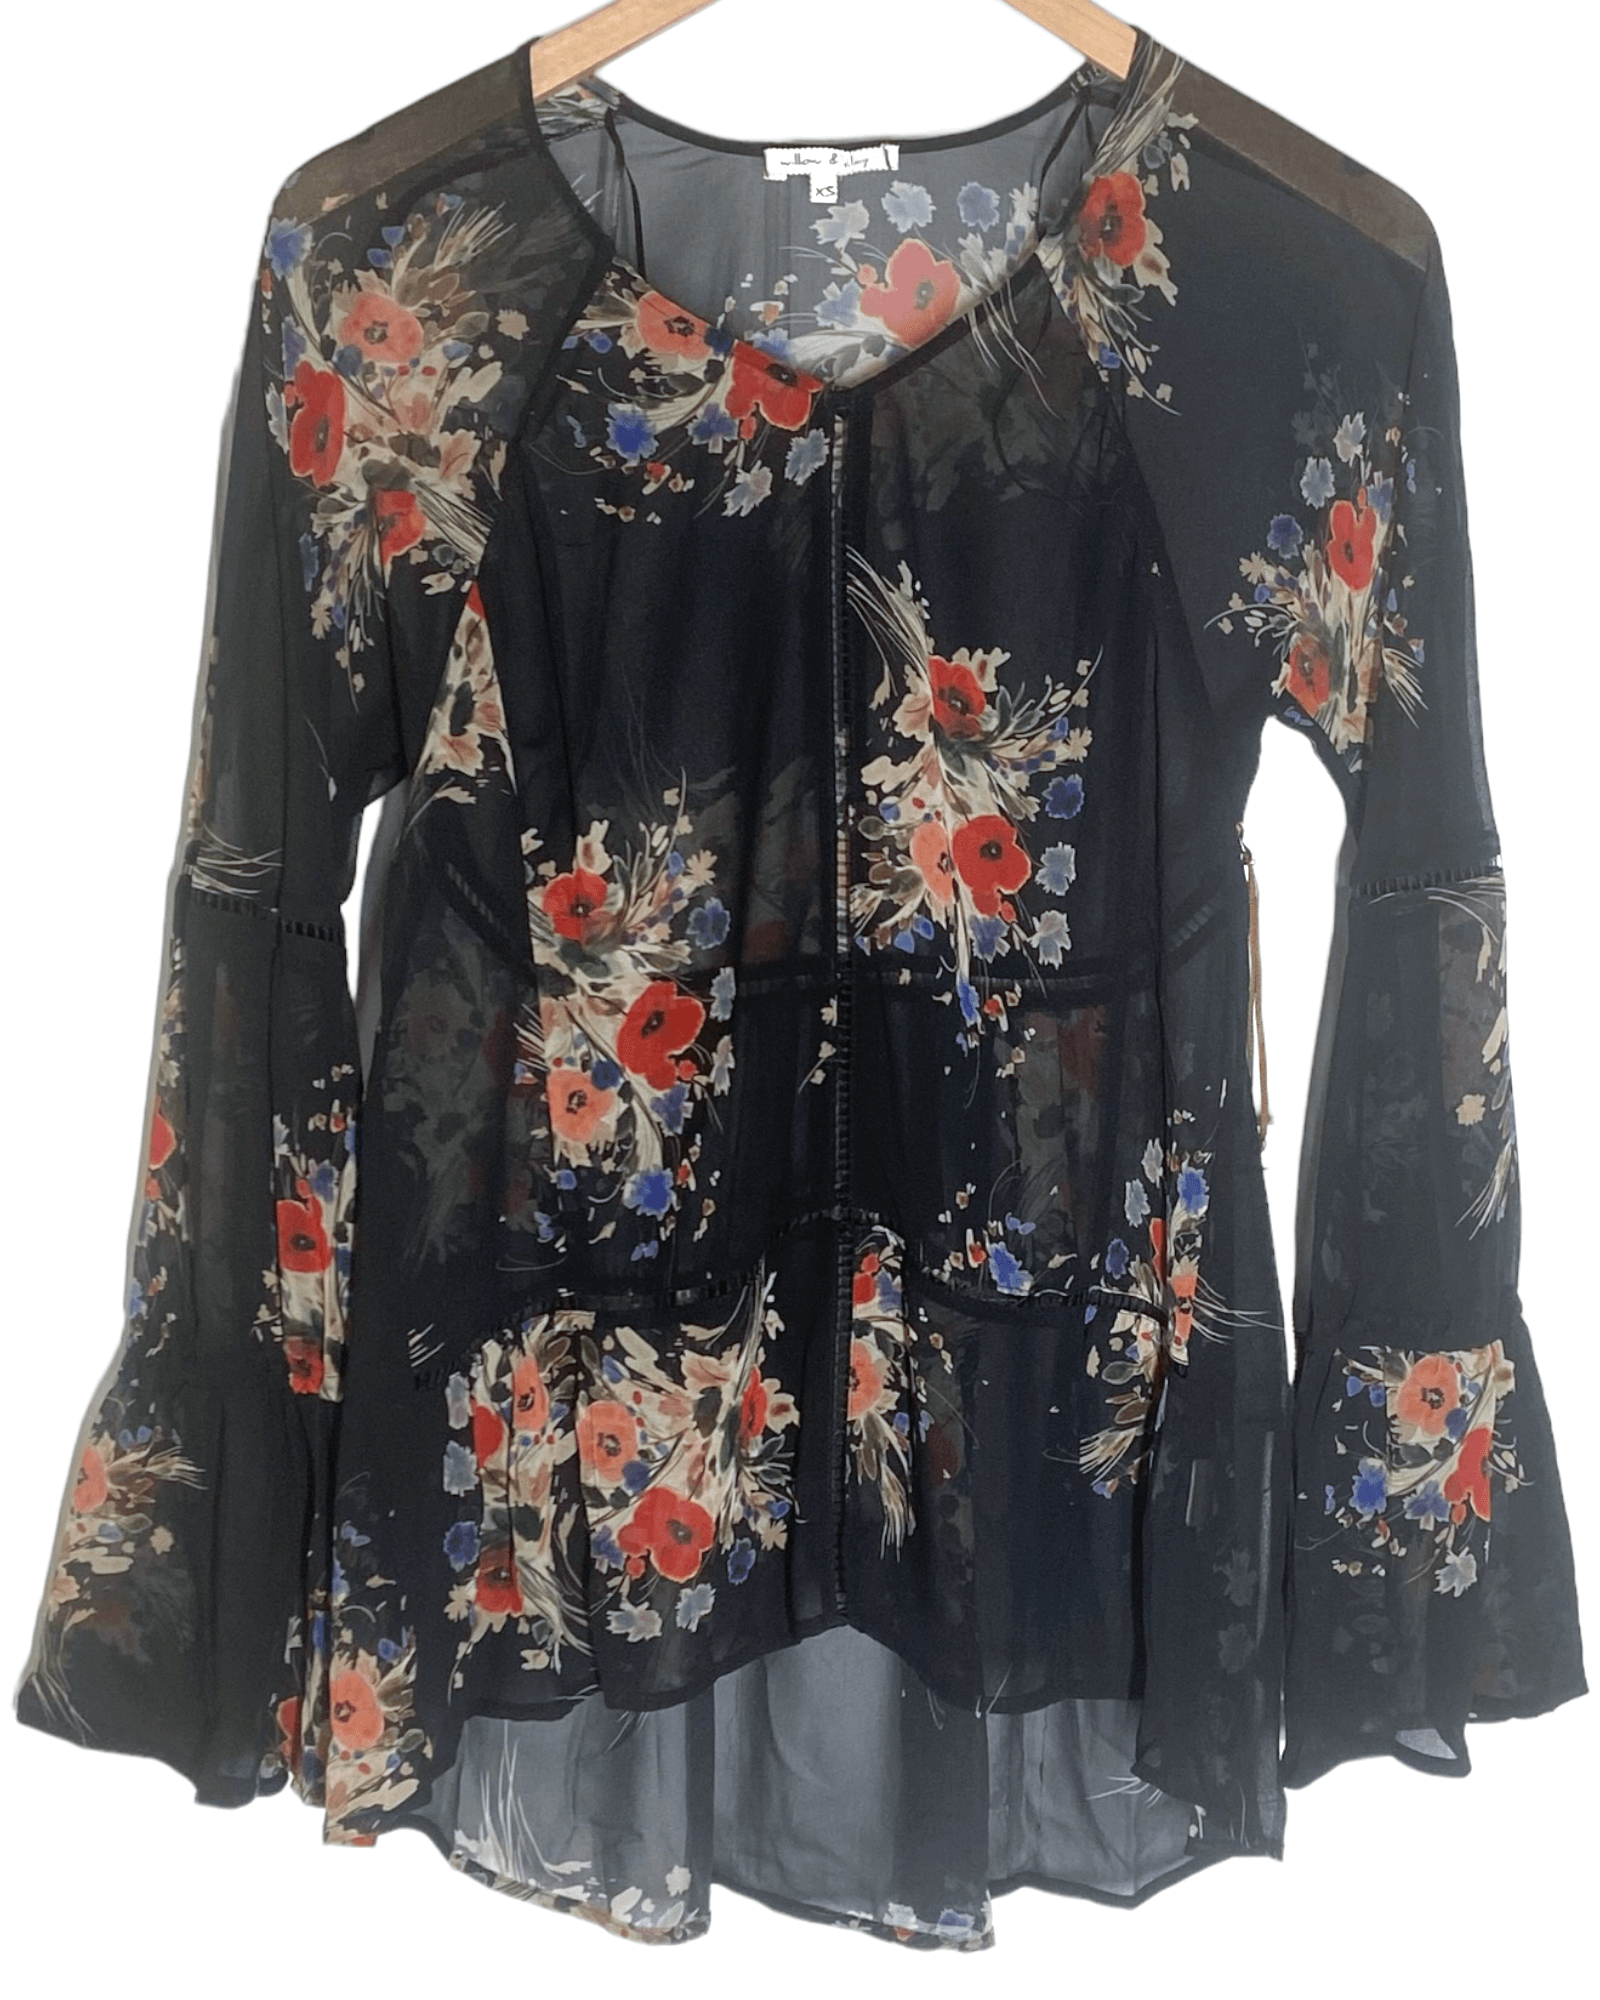 Dark Autumn WILLOW AND CLAY black and red floral print sheer blouse